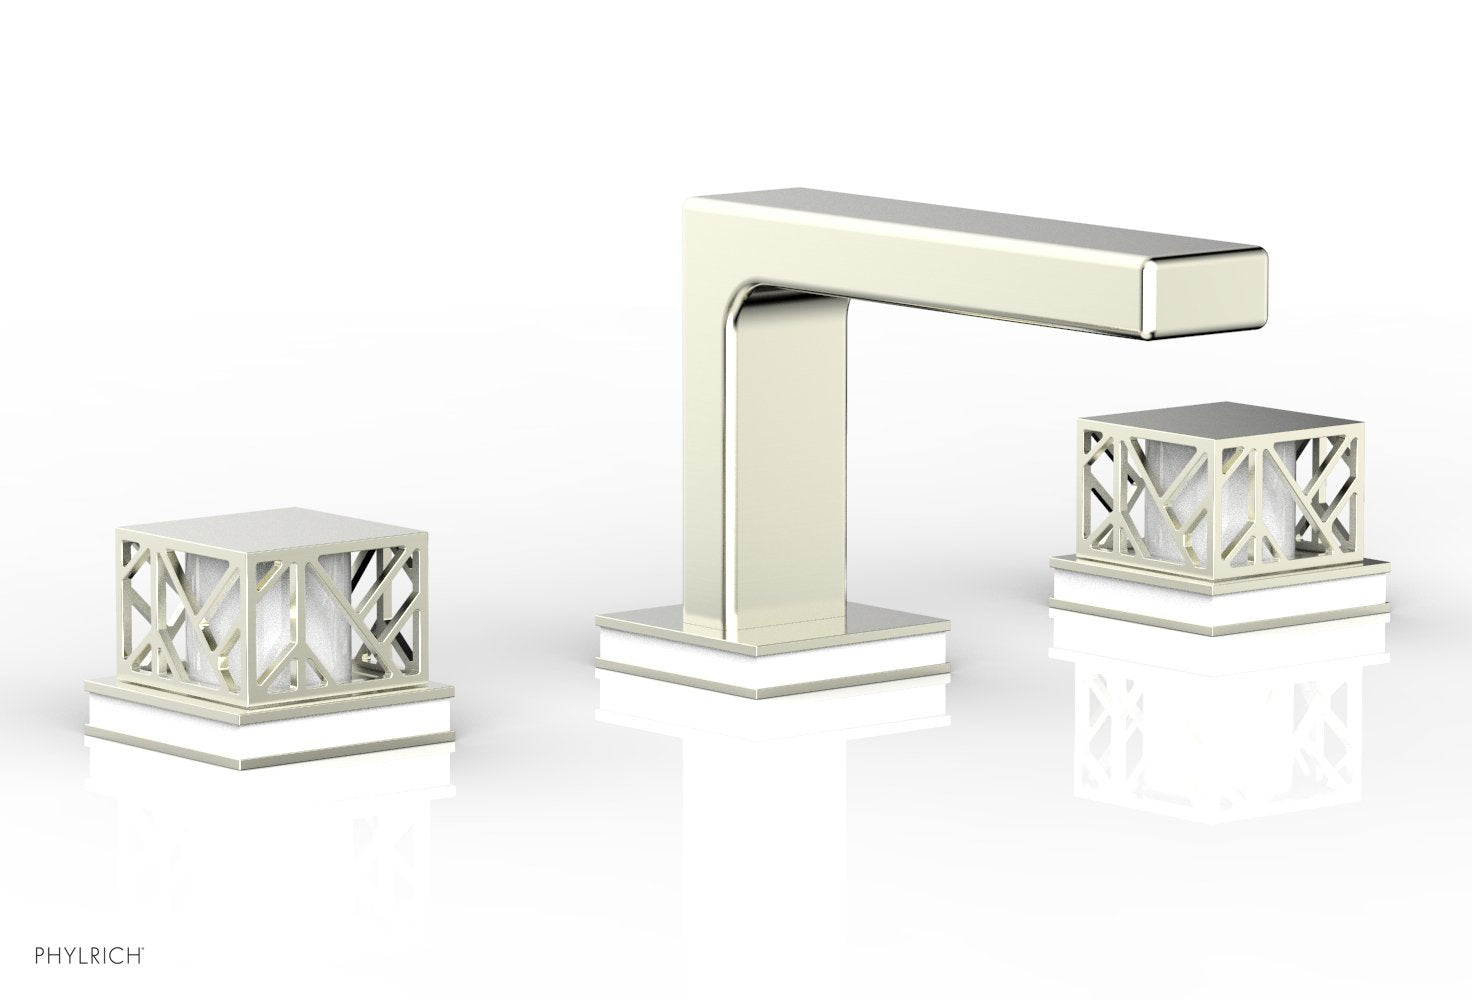 Phylrich JOLIE Widespread Faucet - Square Handles with "Gloss White" Accents